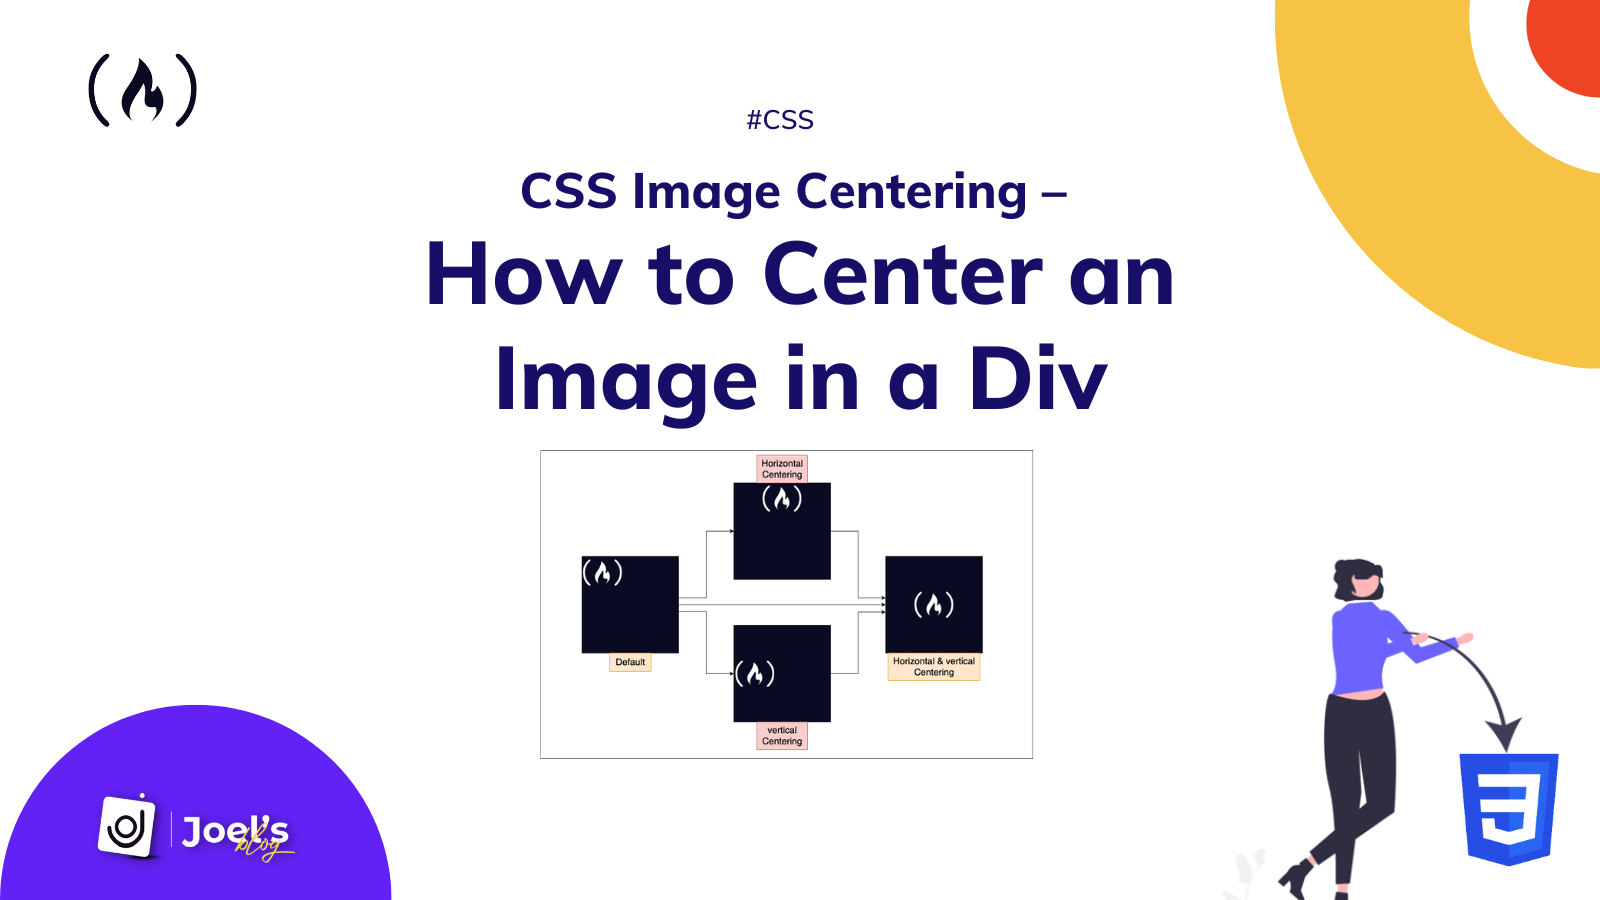 CSS Image Centering – How to Center an Image in a Div